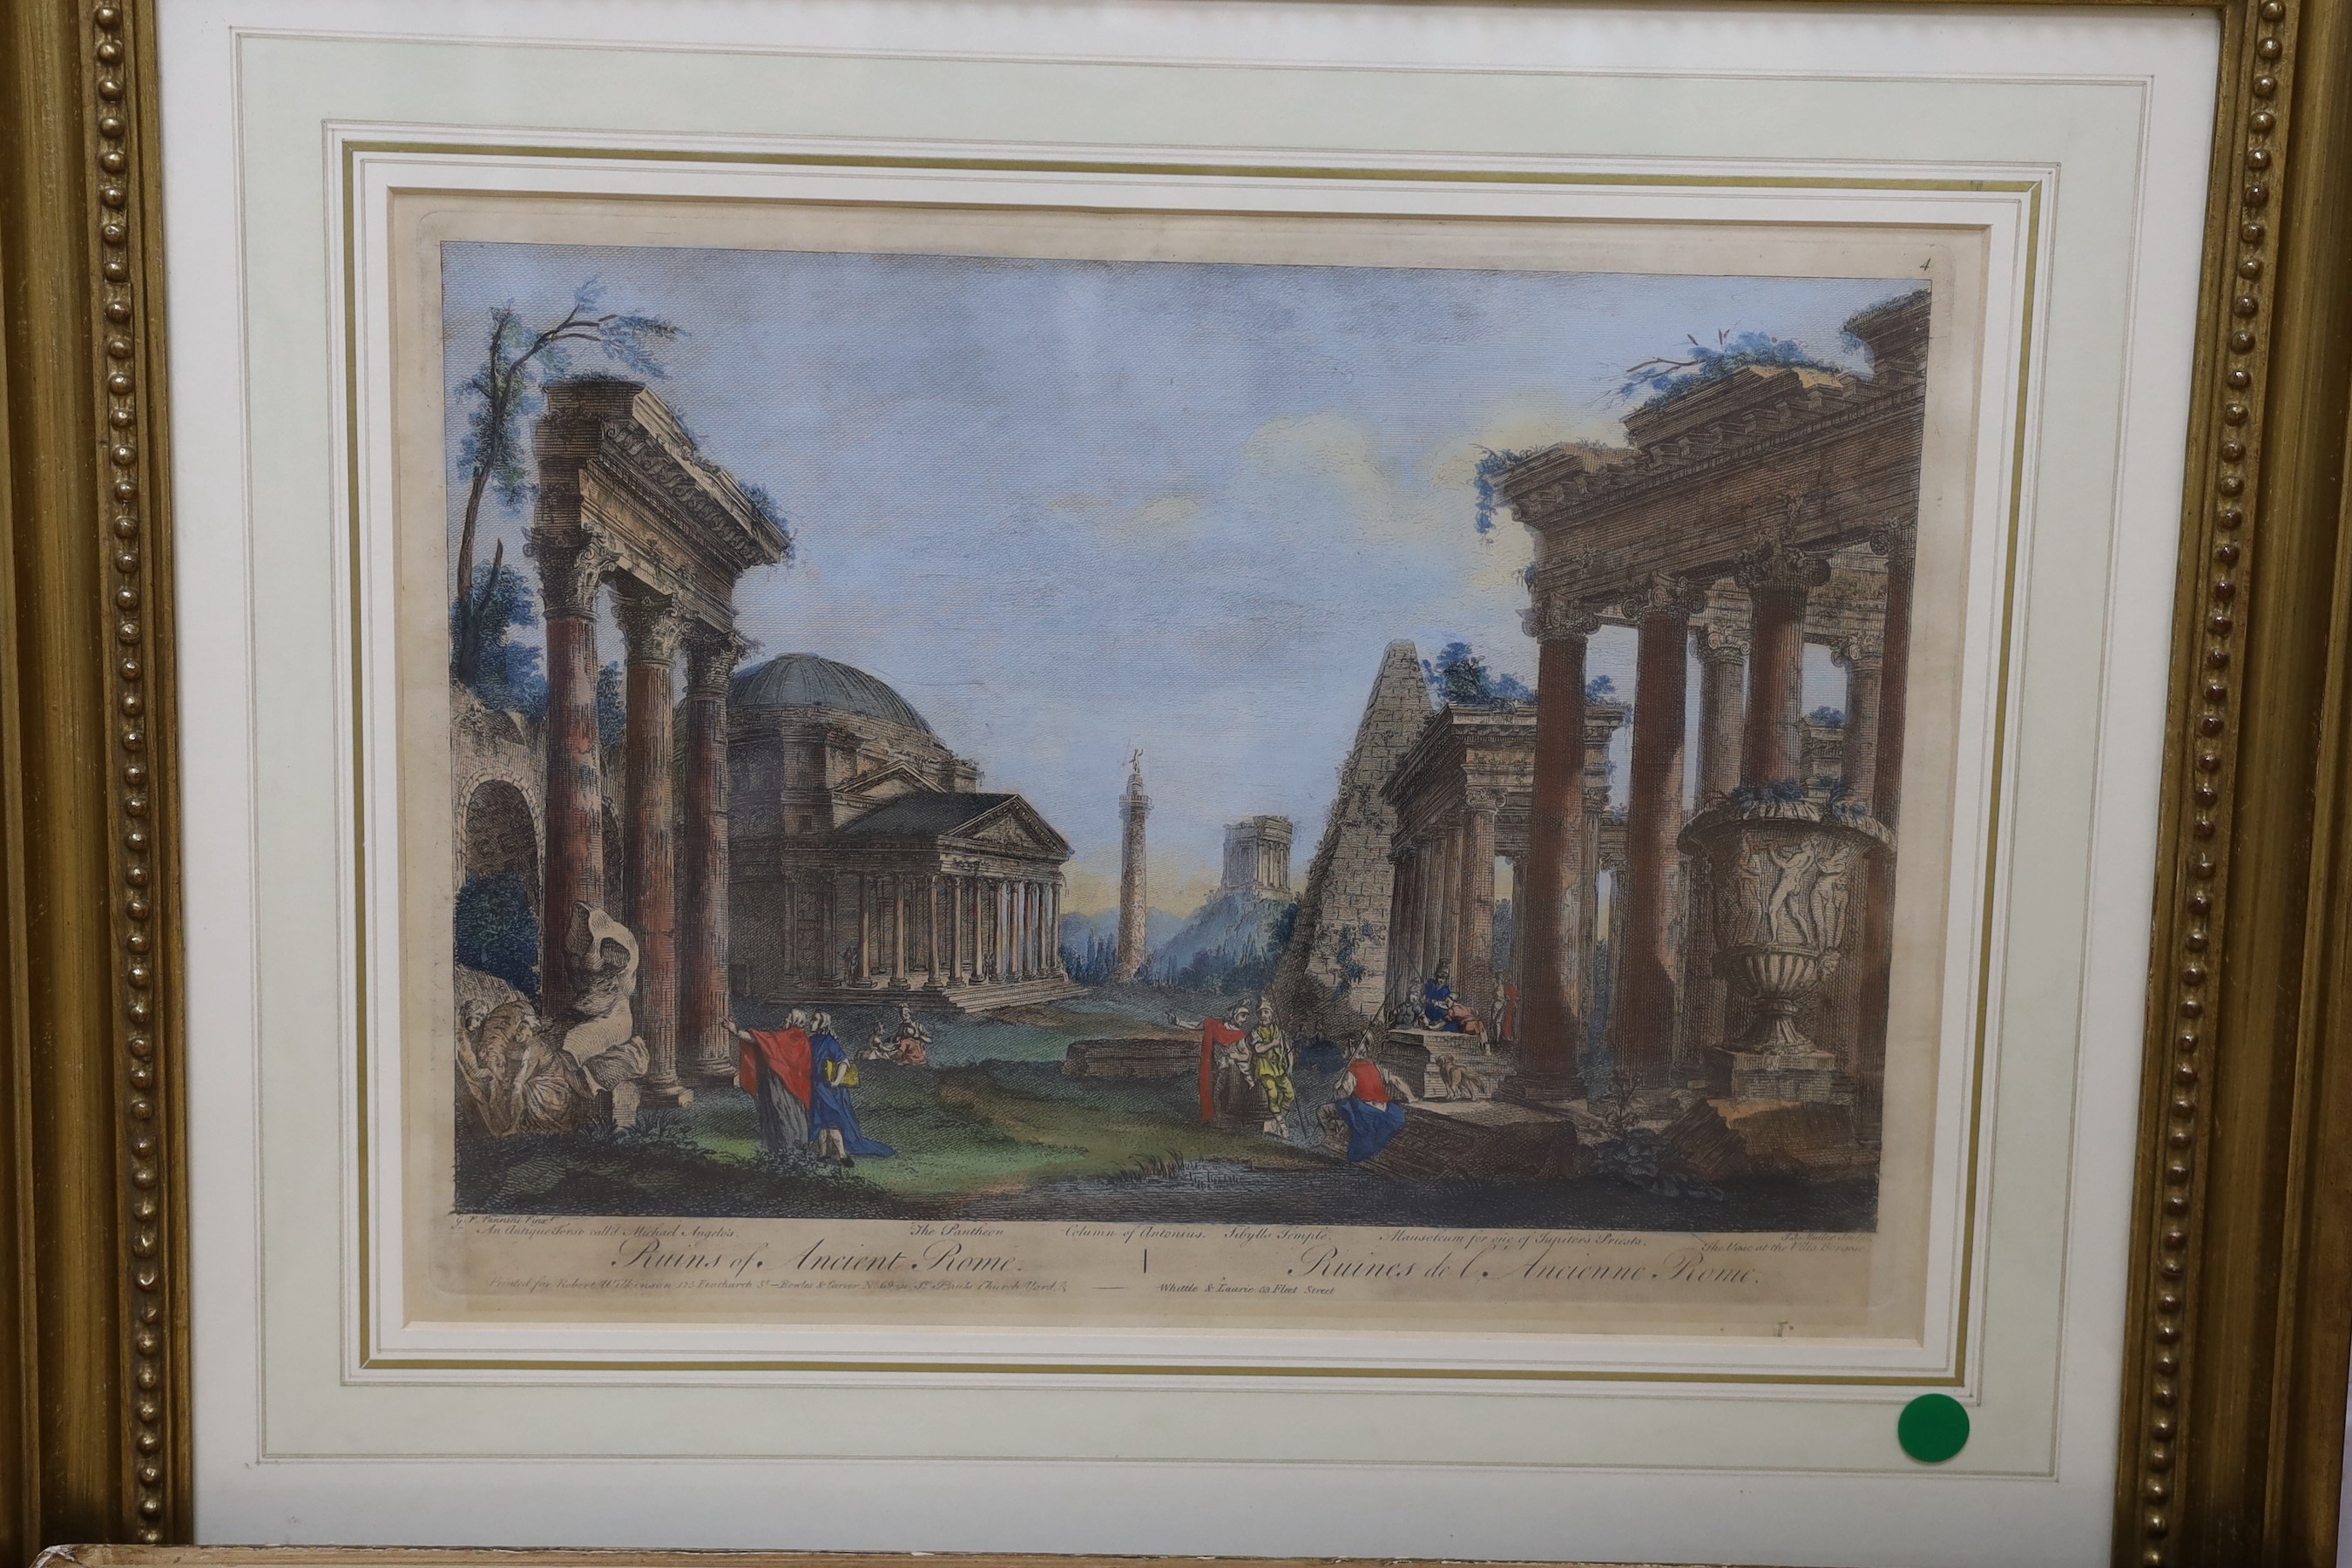 Whittle & Laurie, four coloured engravings, Views of Ancient Rome, 29 x 40cm